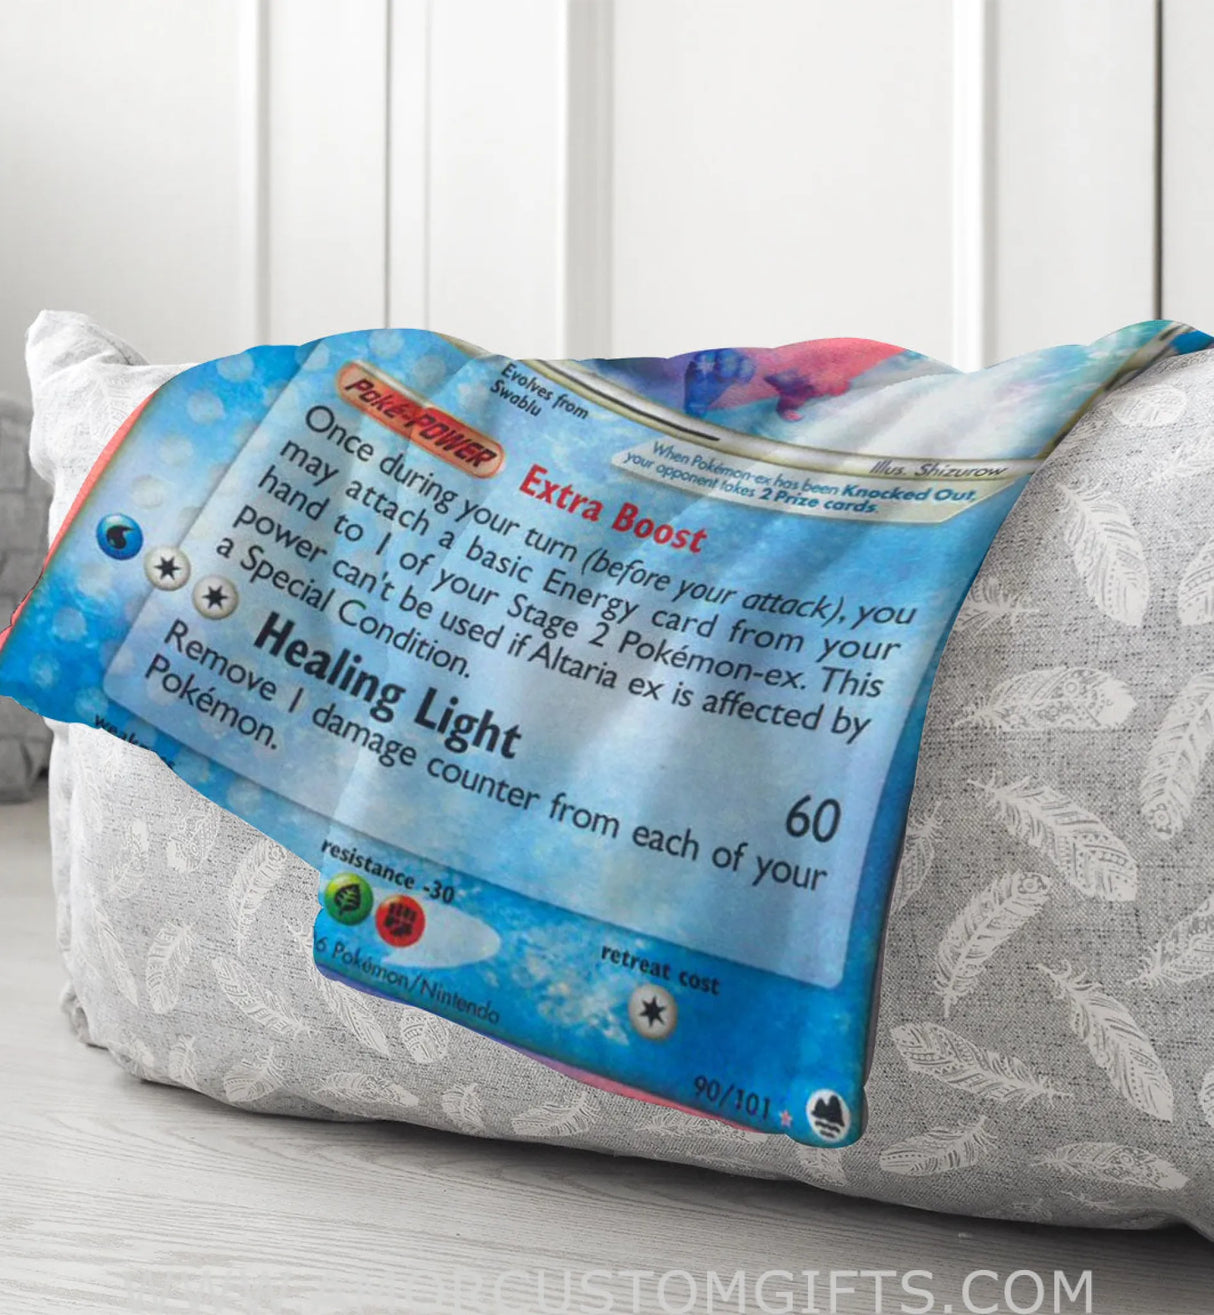 Altaria Ex Ex Series Sherpa Blanket | Custom Pk Trading Card Personalize Anime Fan Gift